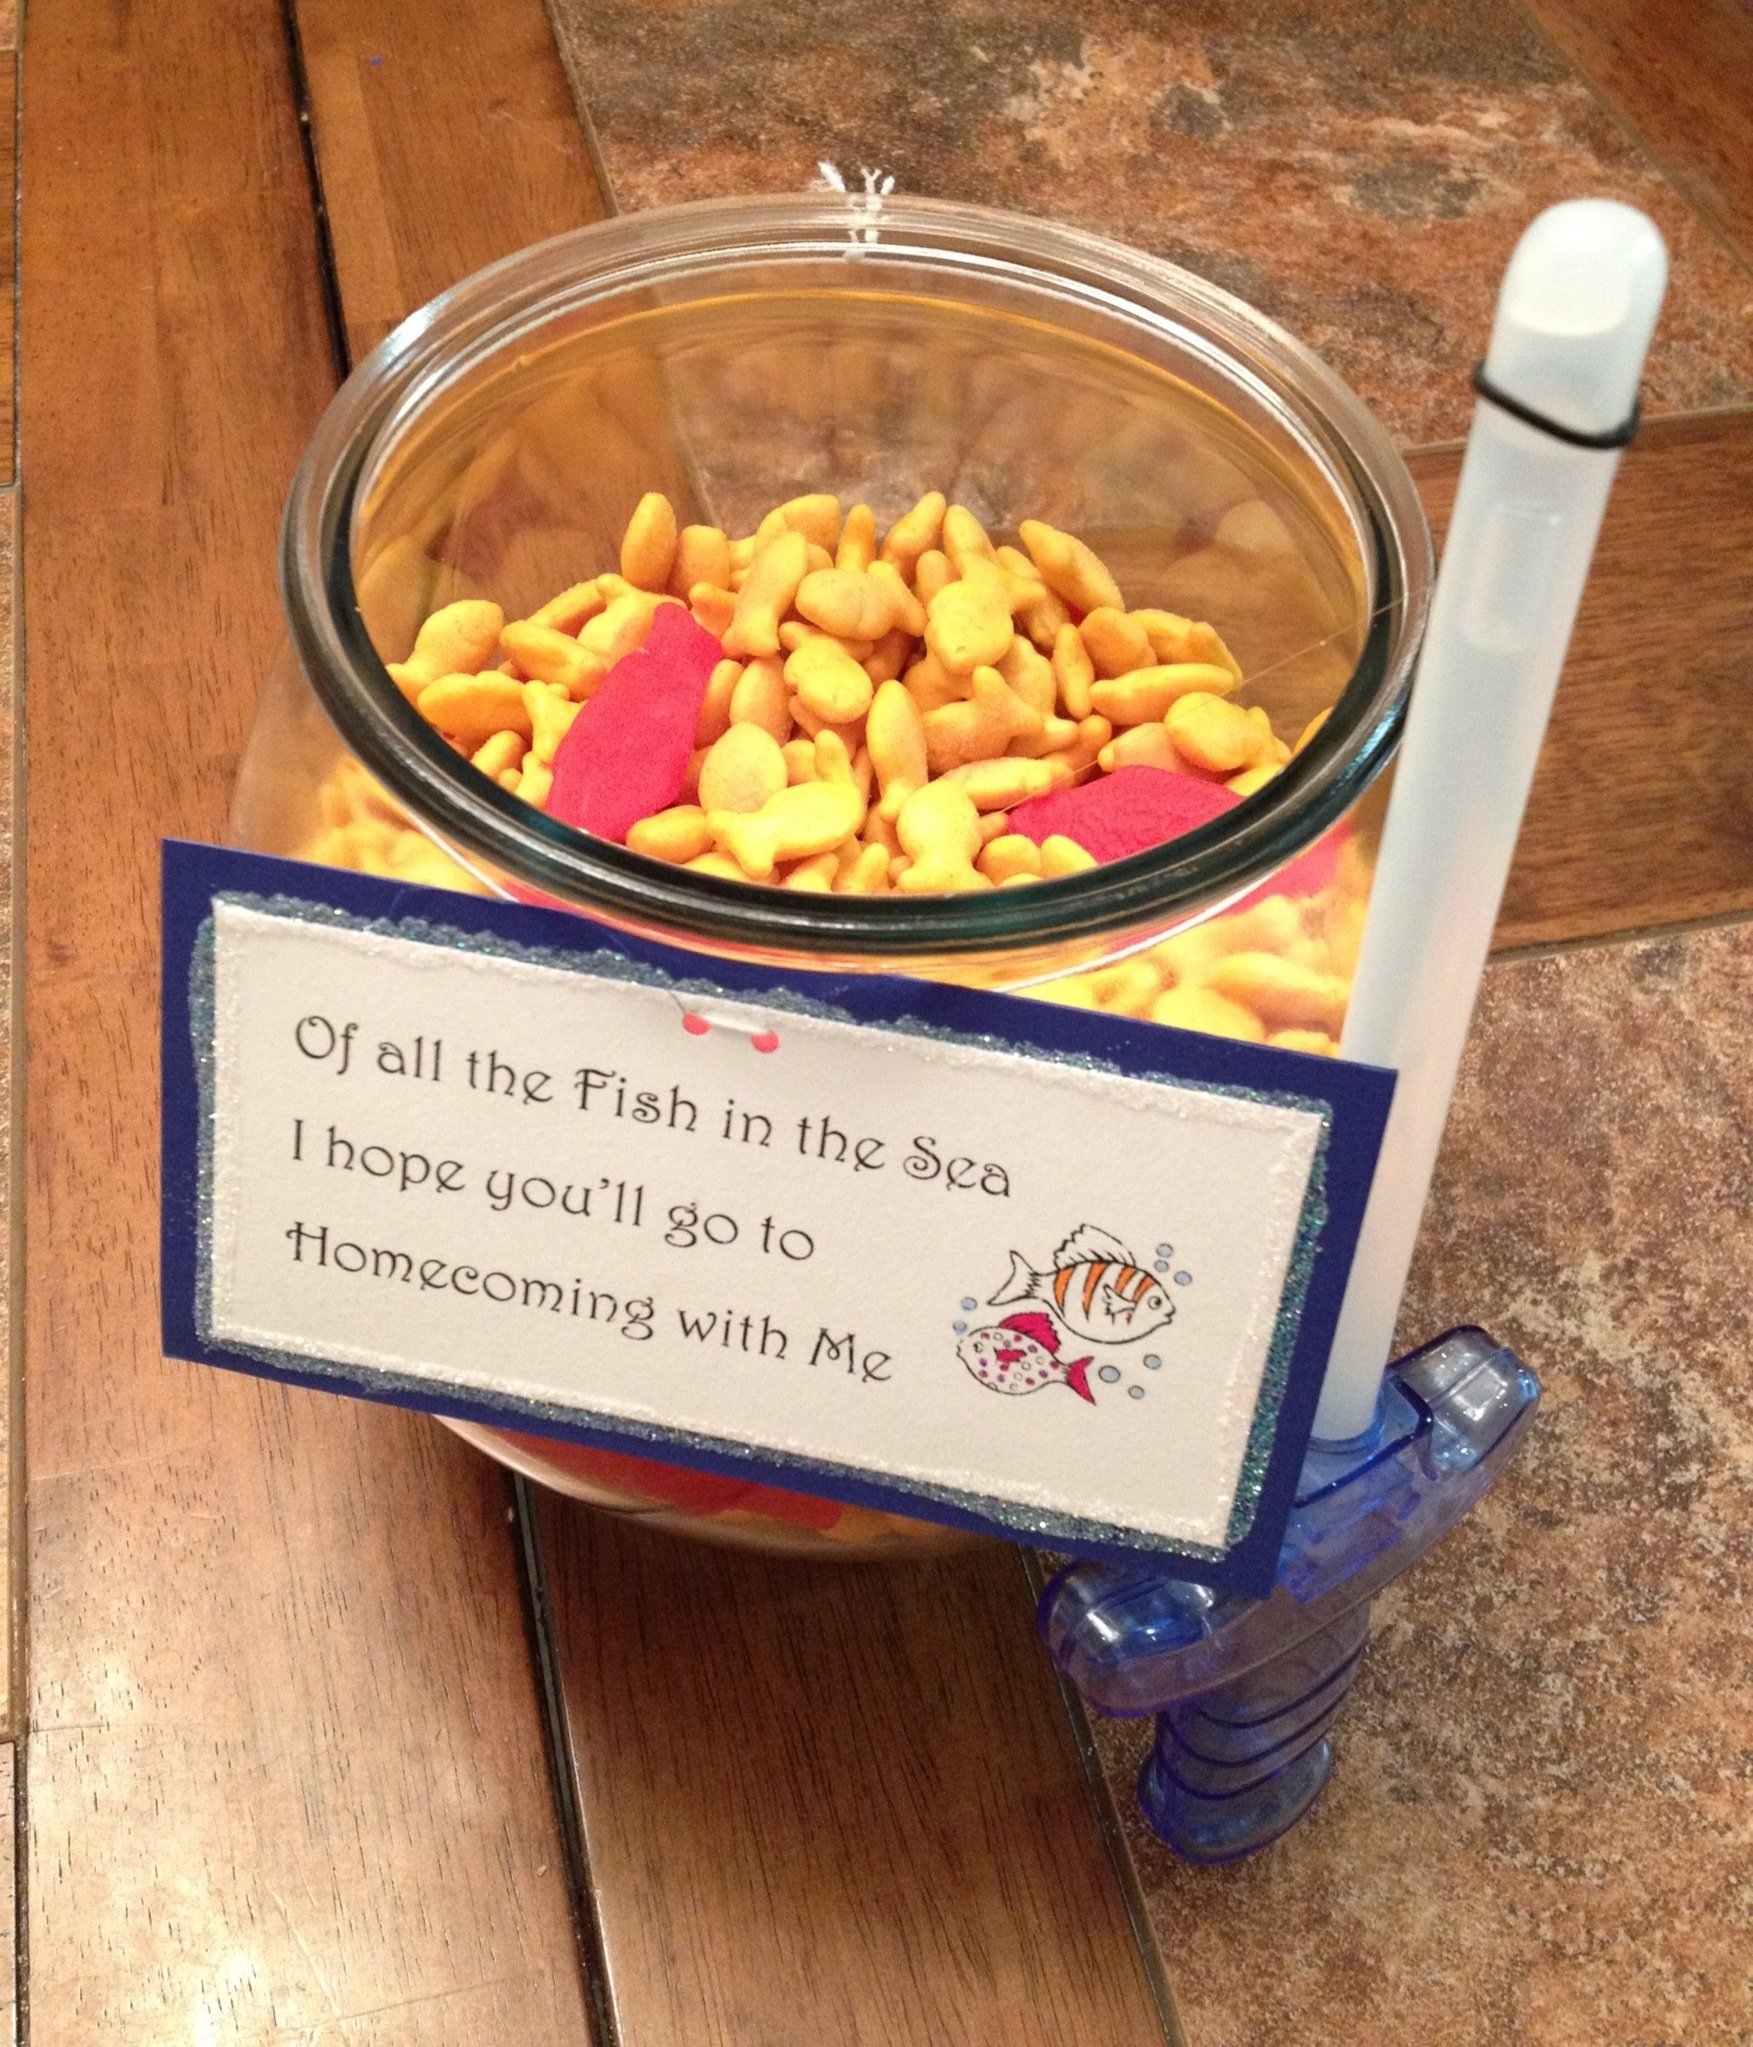 10 Trendy Asking A Girl To Prom Ideas another idea for asking a girl to homecoming prom the fishbowl is 10 2022